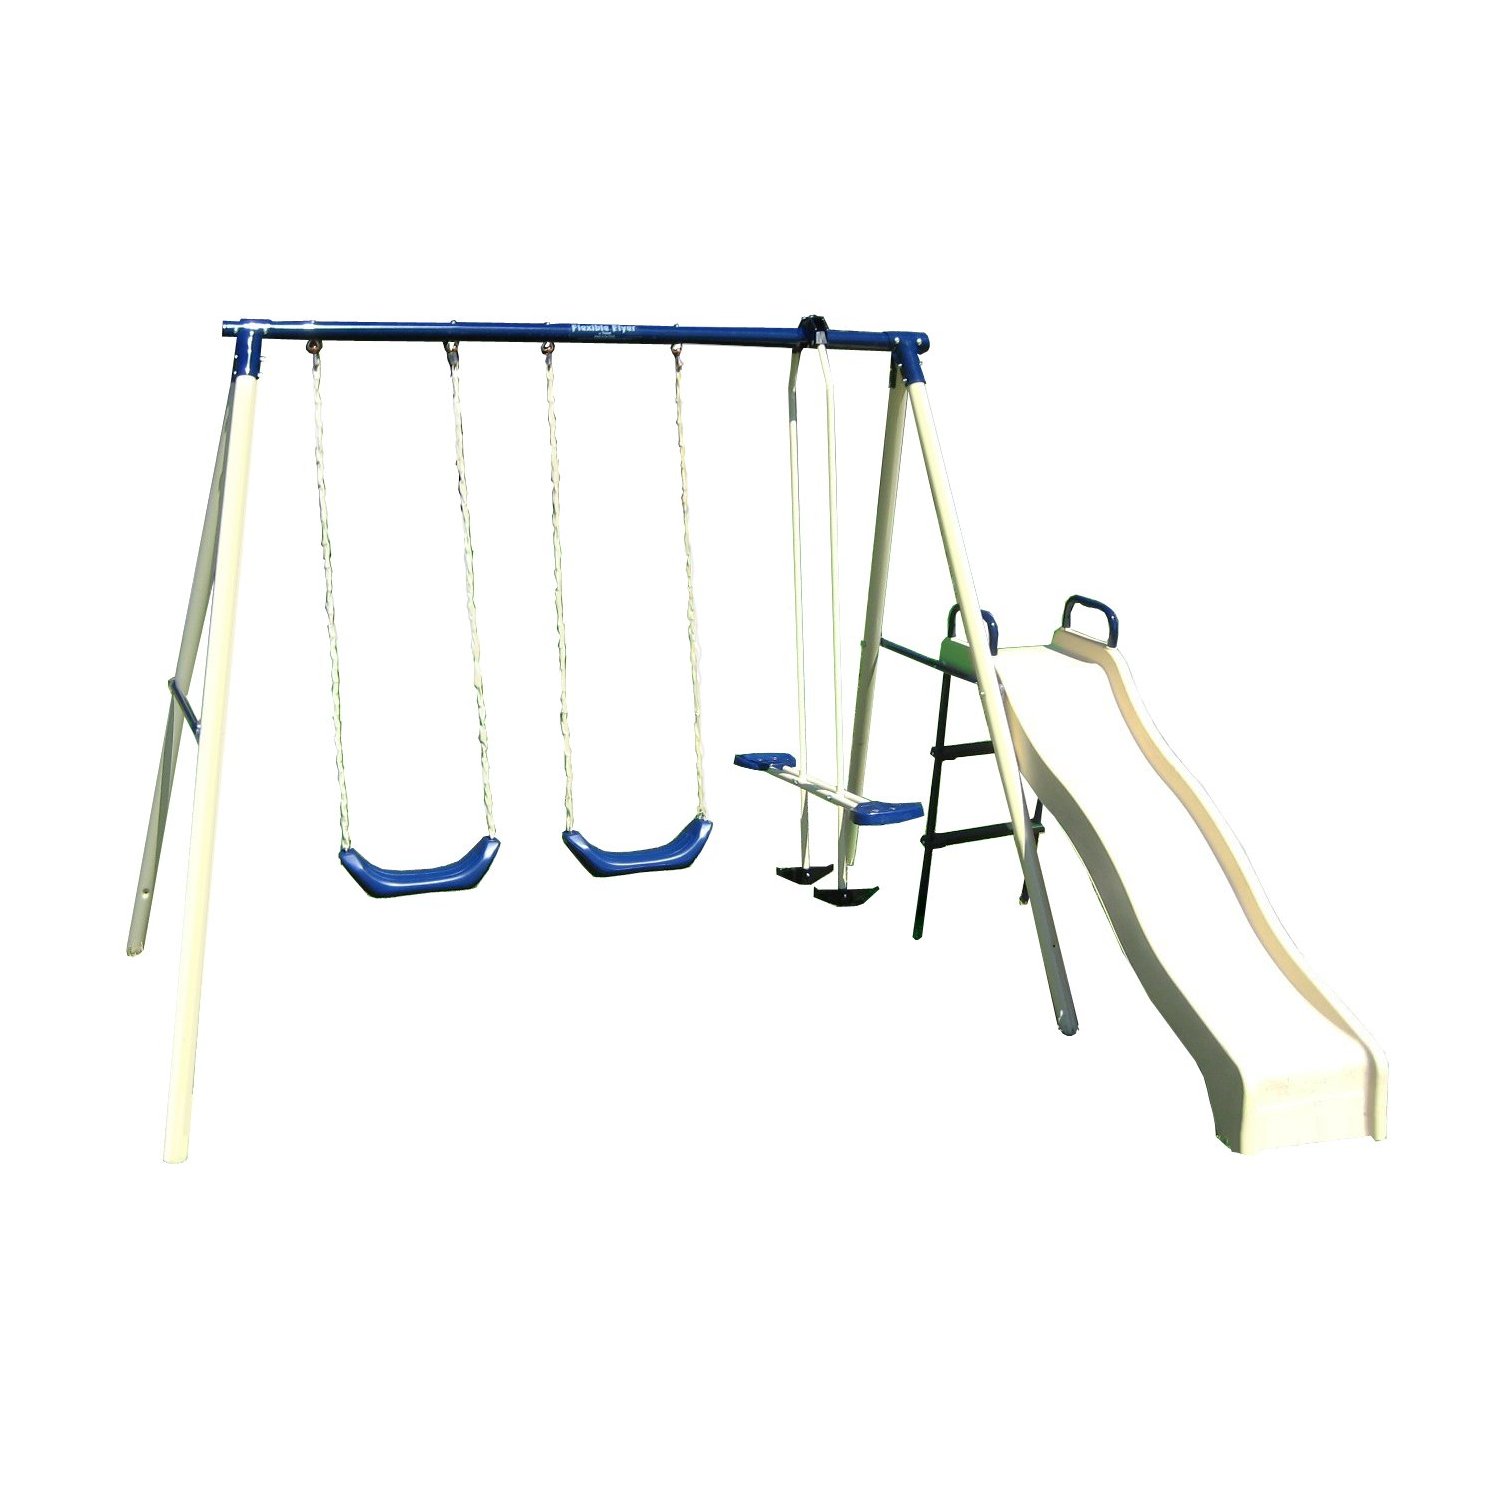 Flexible Flyer Swing N Glide Iii Swing Set With Plays Check Price Now